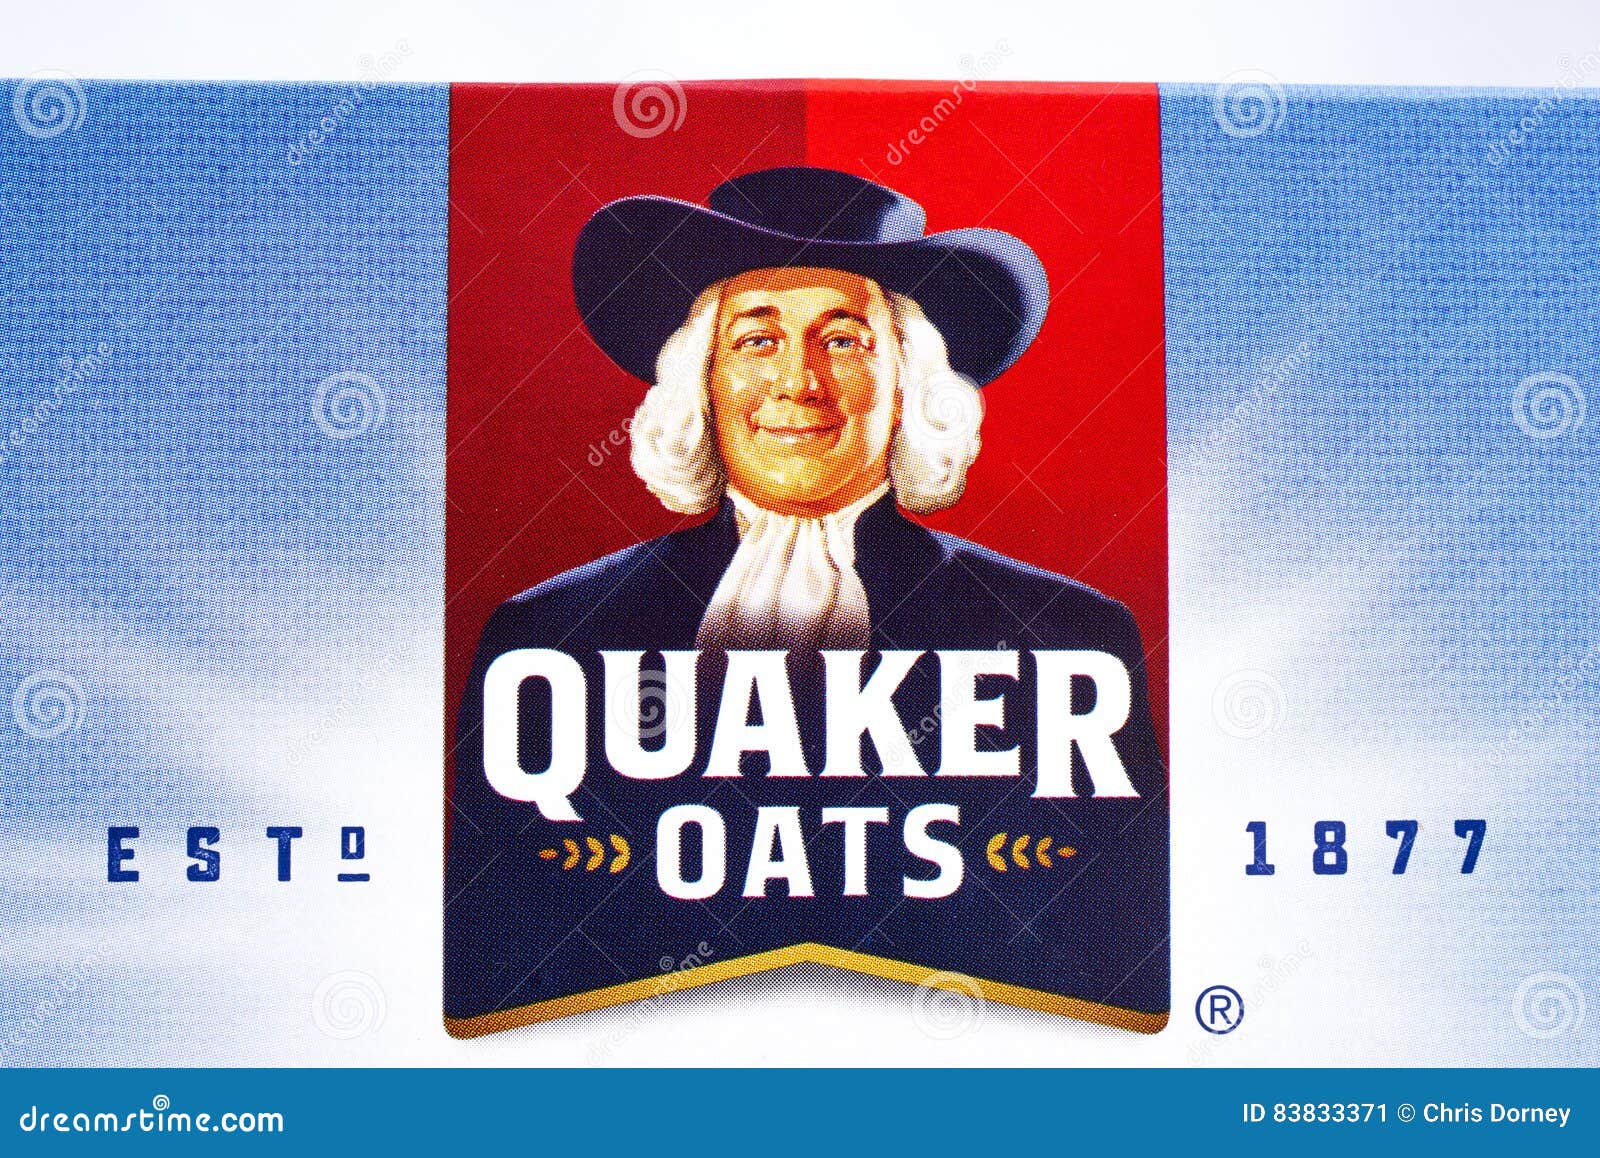 quaker-oats-comapny-logo-london-uk-january-th-close-up-shot-company-th-january-have-been-owned-pepsico-83833371.jpg